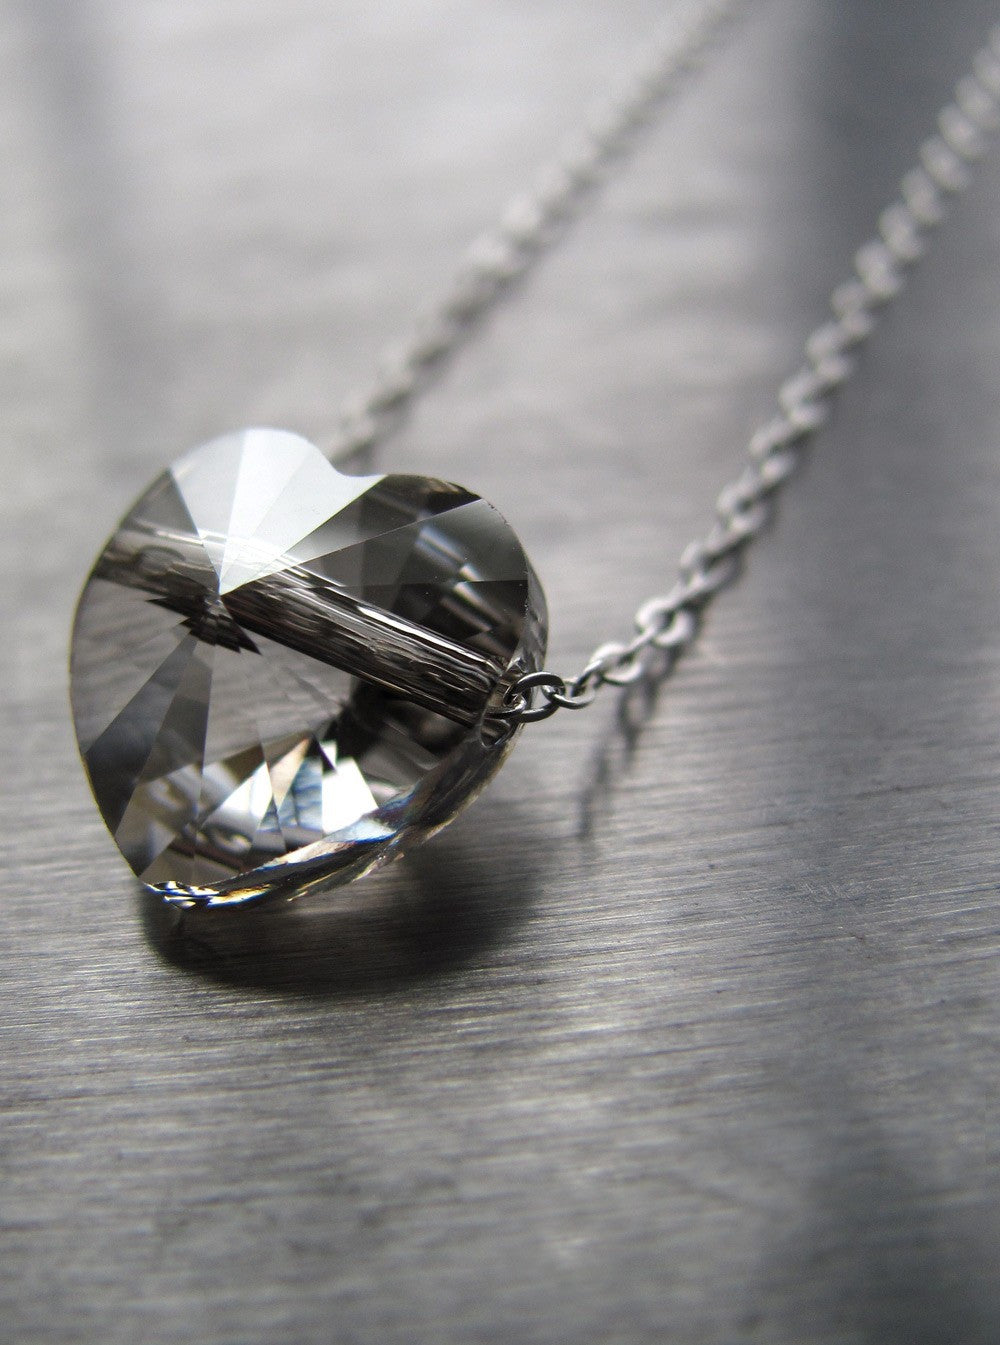 Tiny Heart Pendant Necklace with Clear Crystal